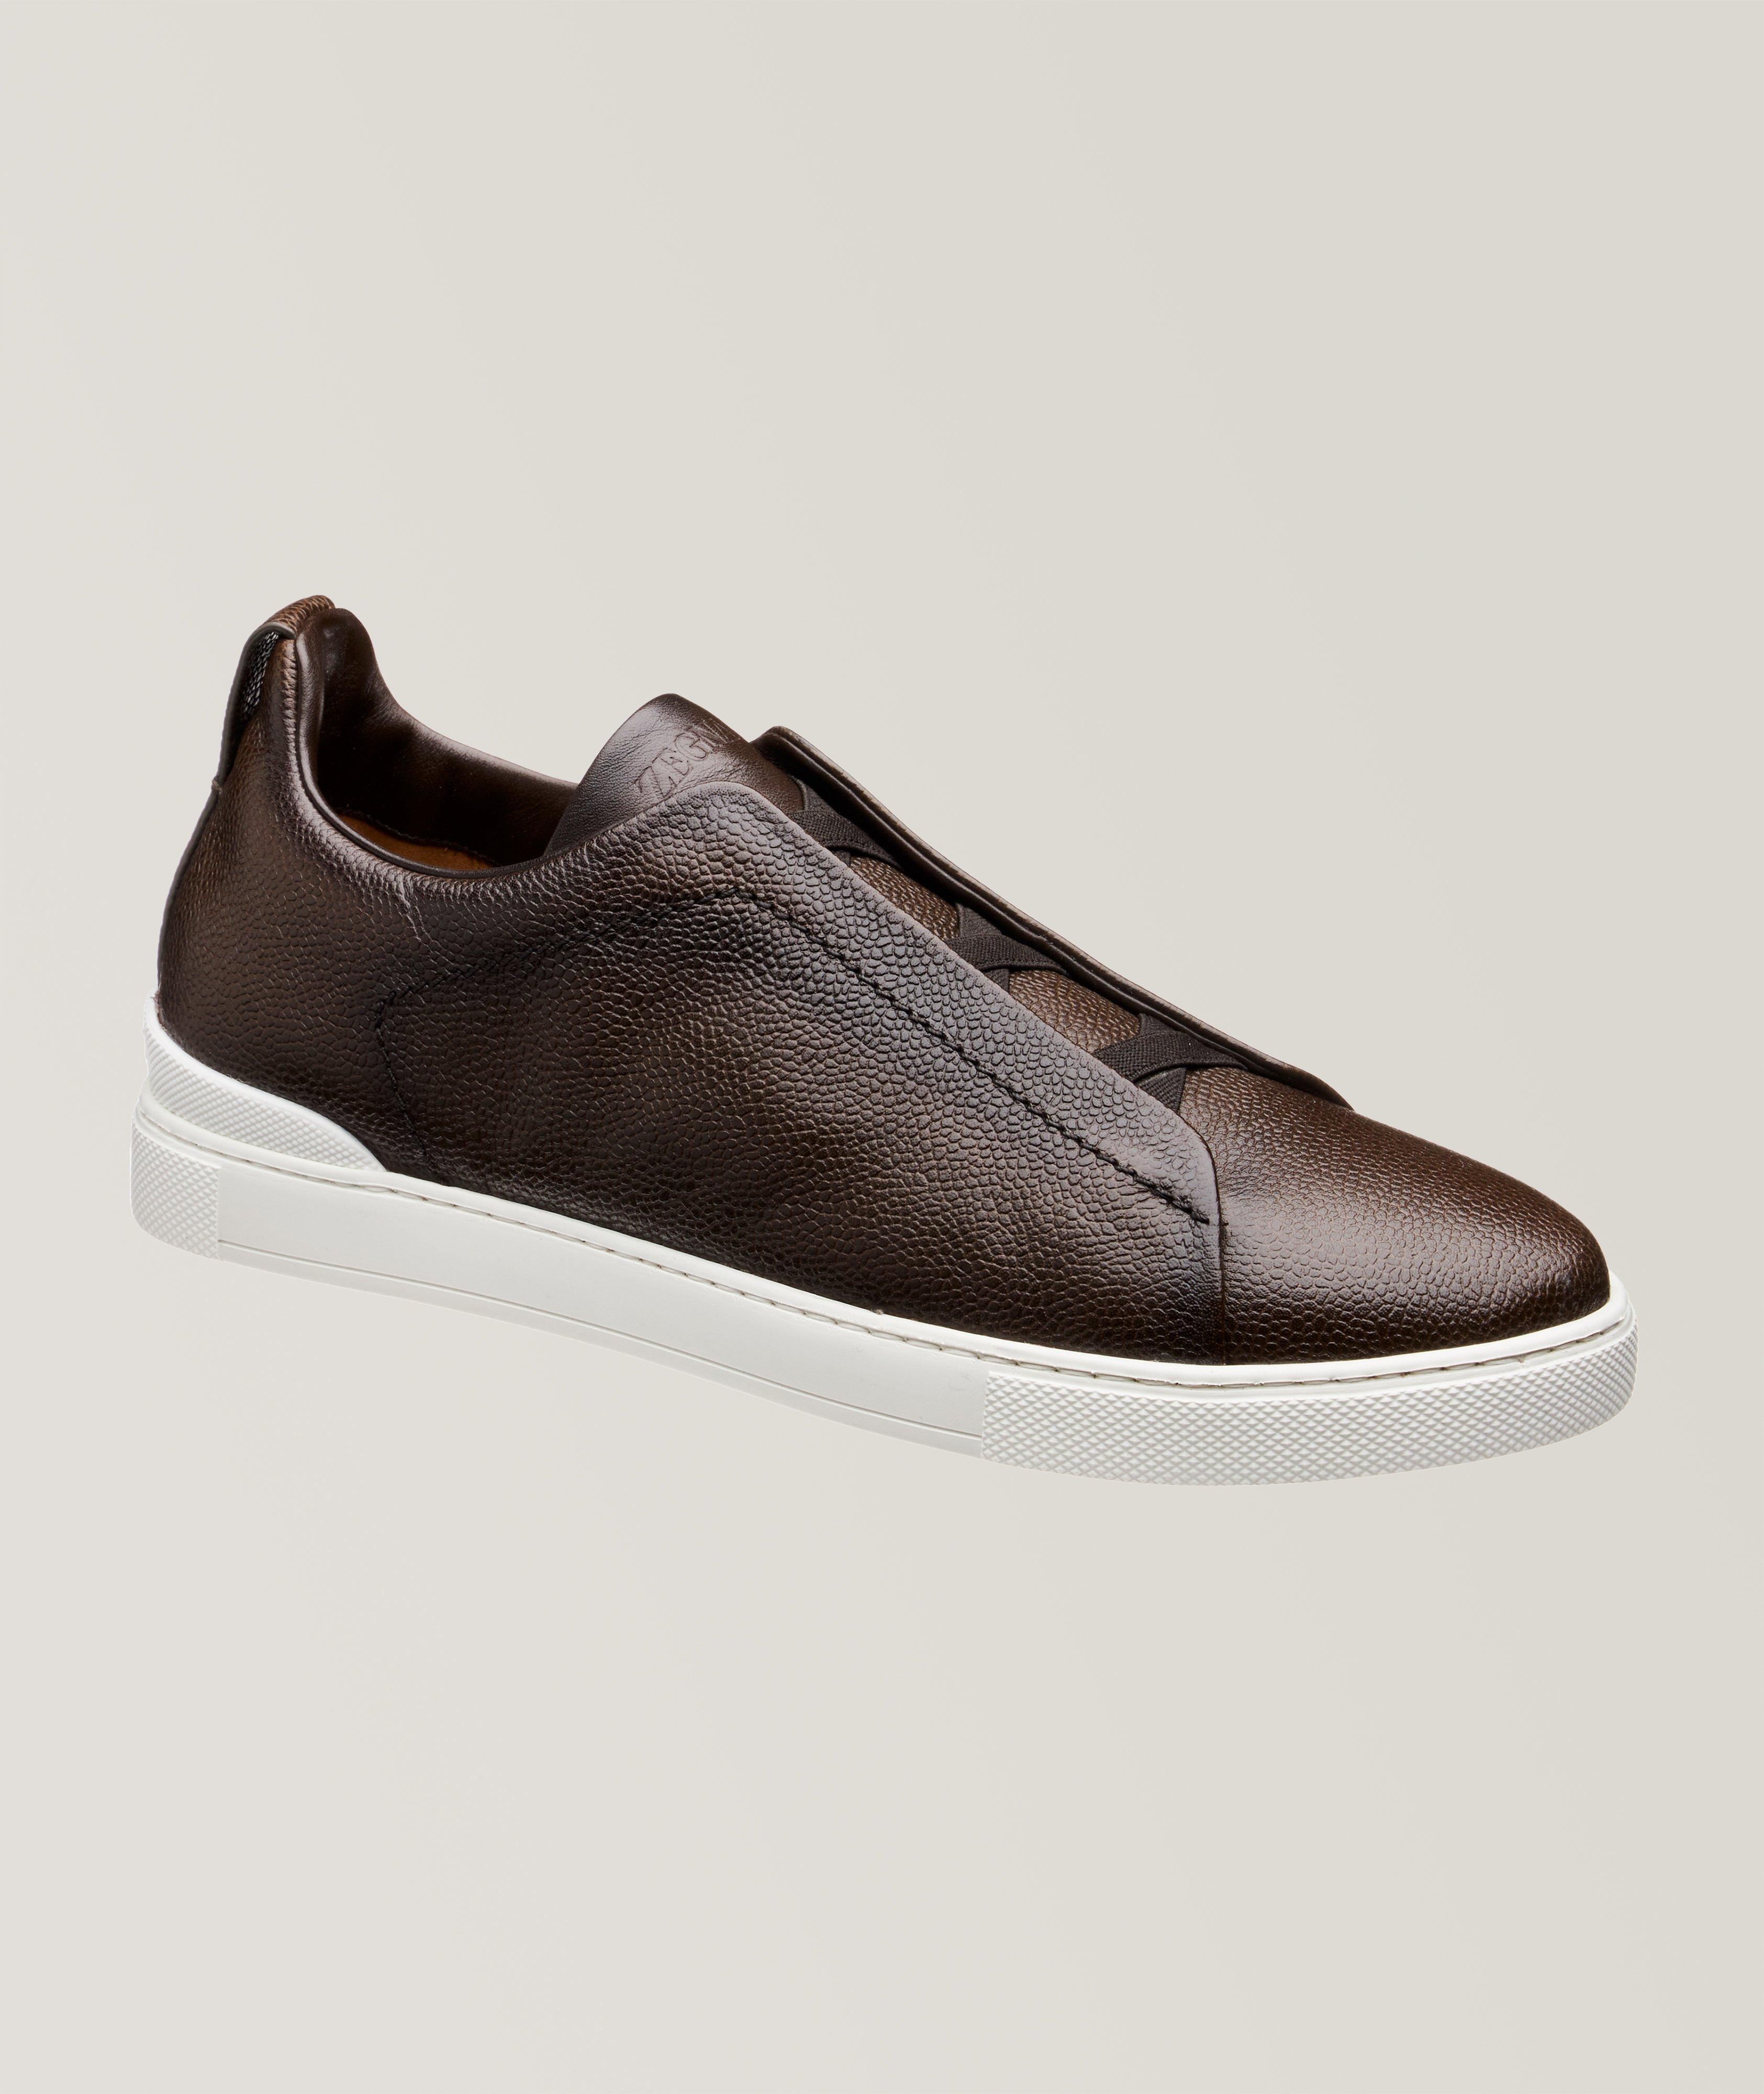 Zegna Triple Stitch Pebbled Leather Slip-On Sneakers | Sneakers | Harry ...